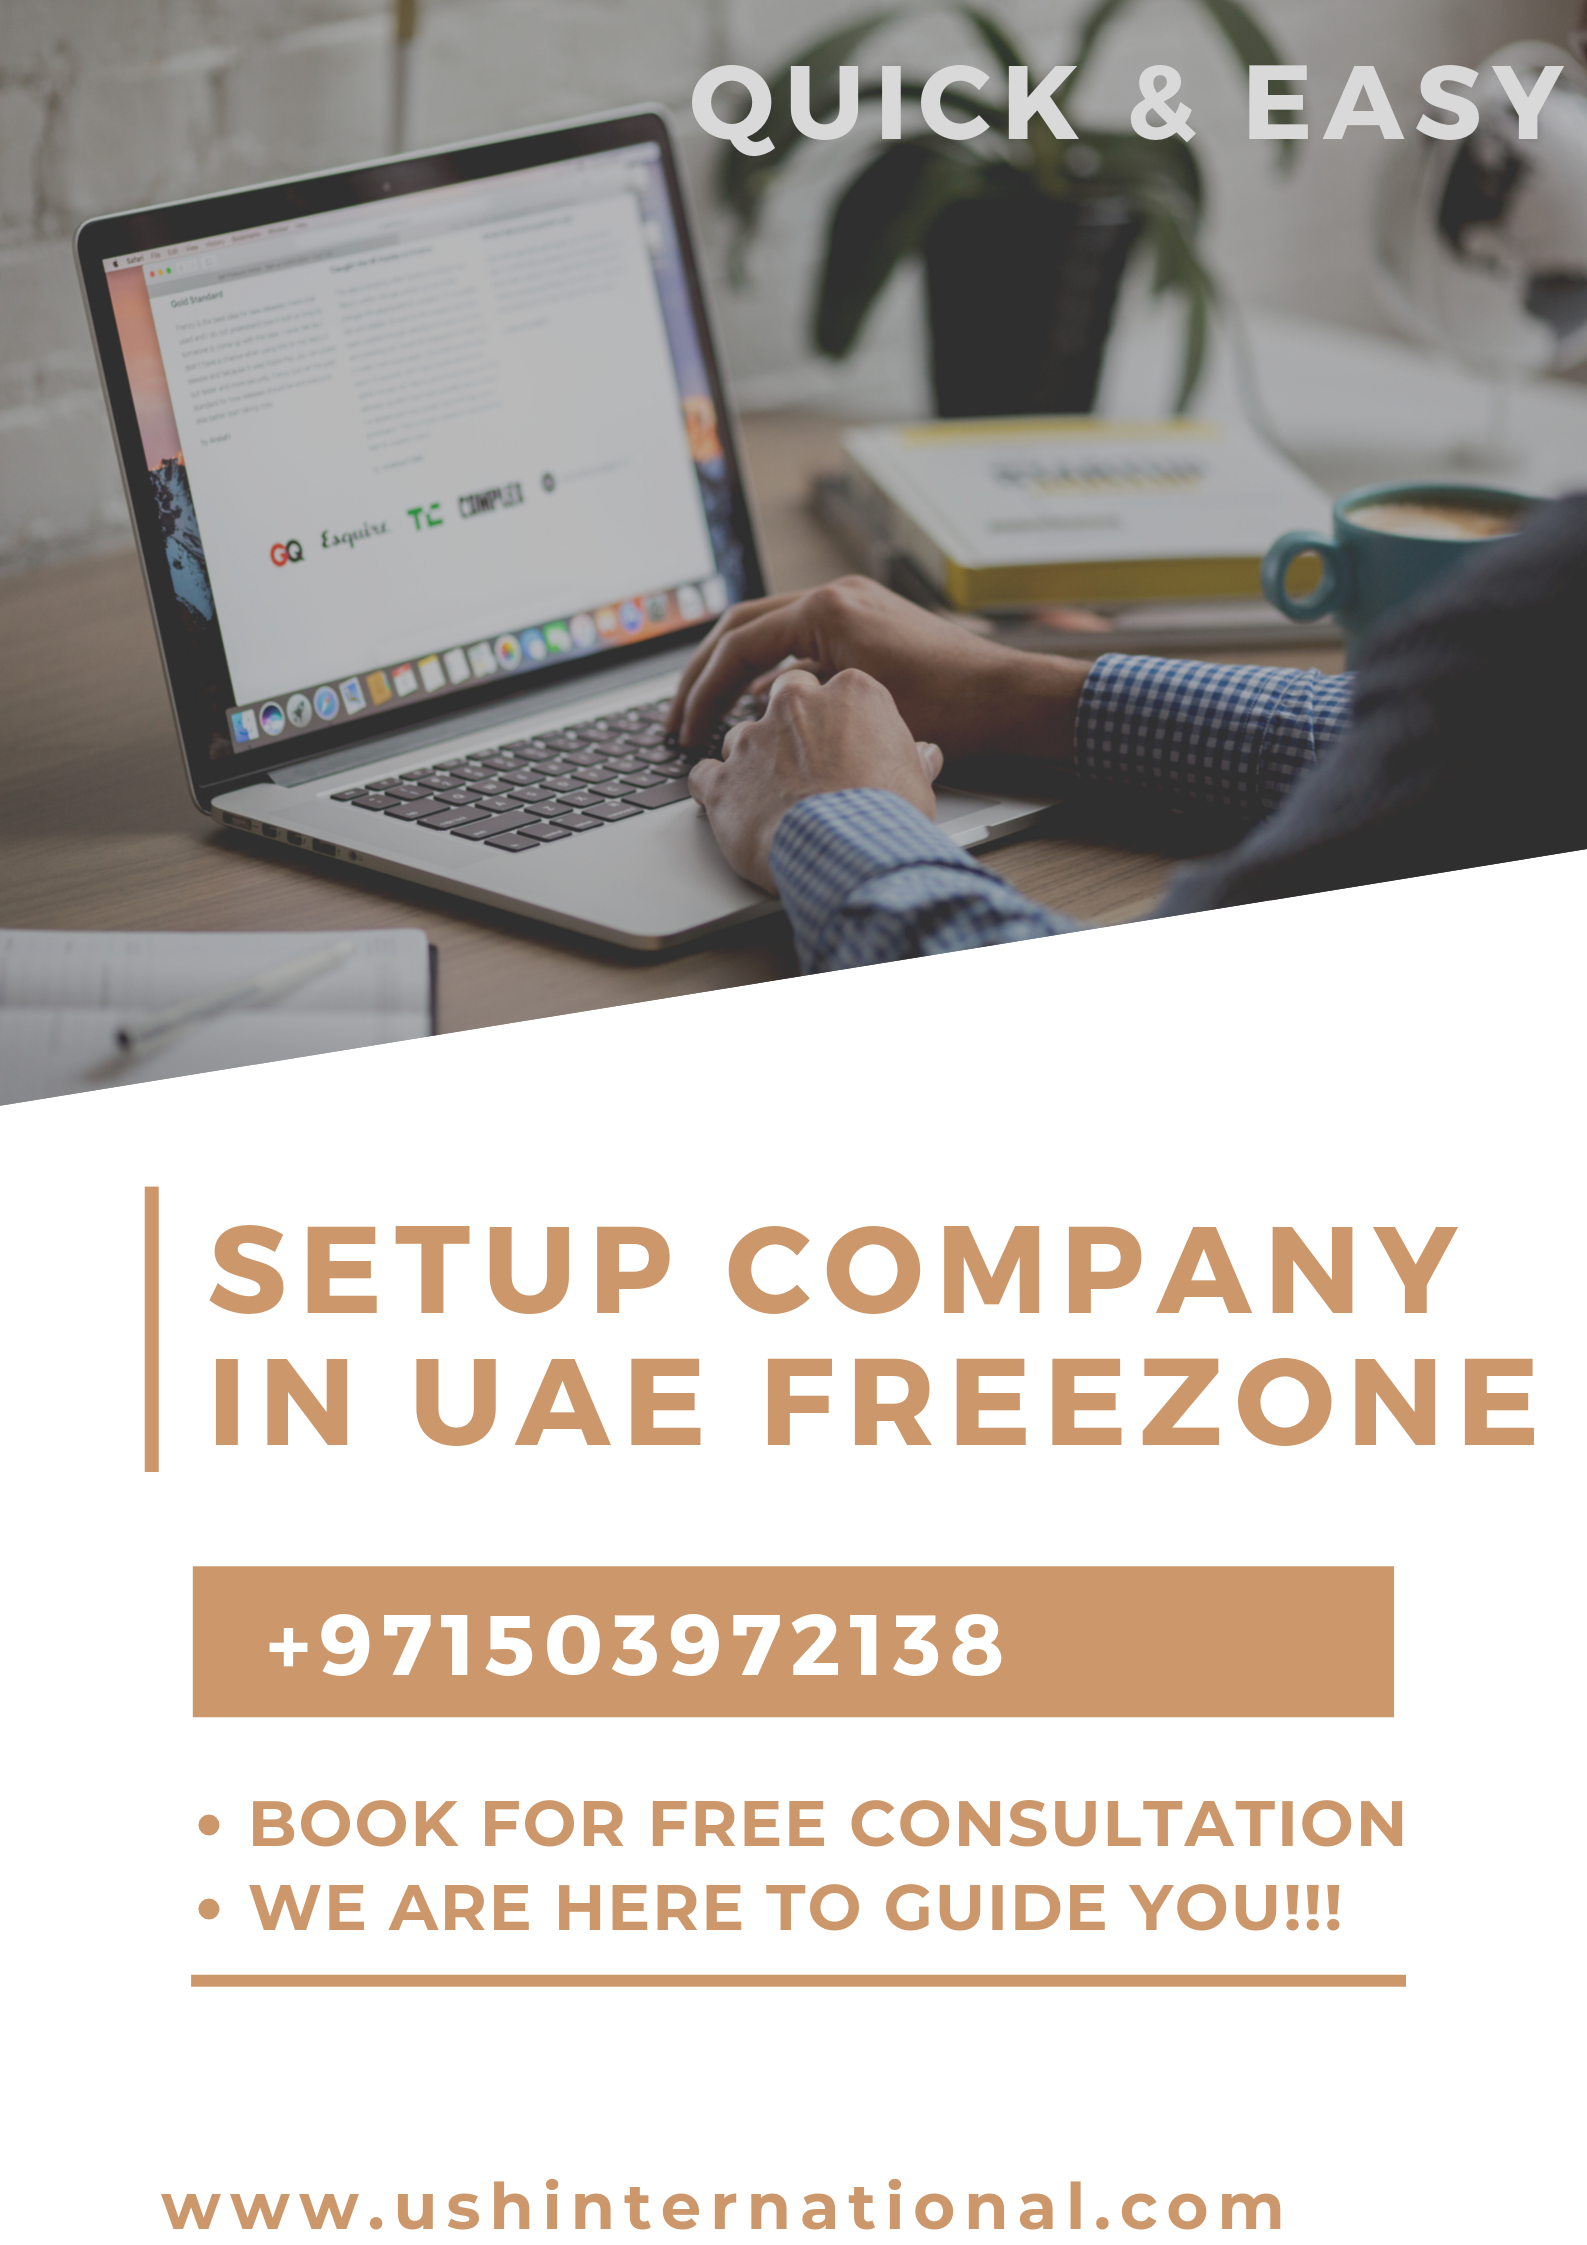 Start your dream Business in UAE +971503972138 FreeZone/Mainland